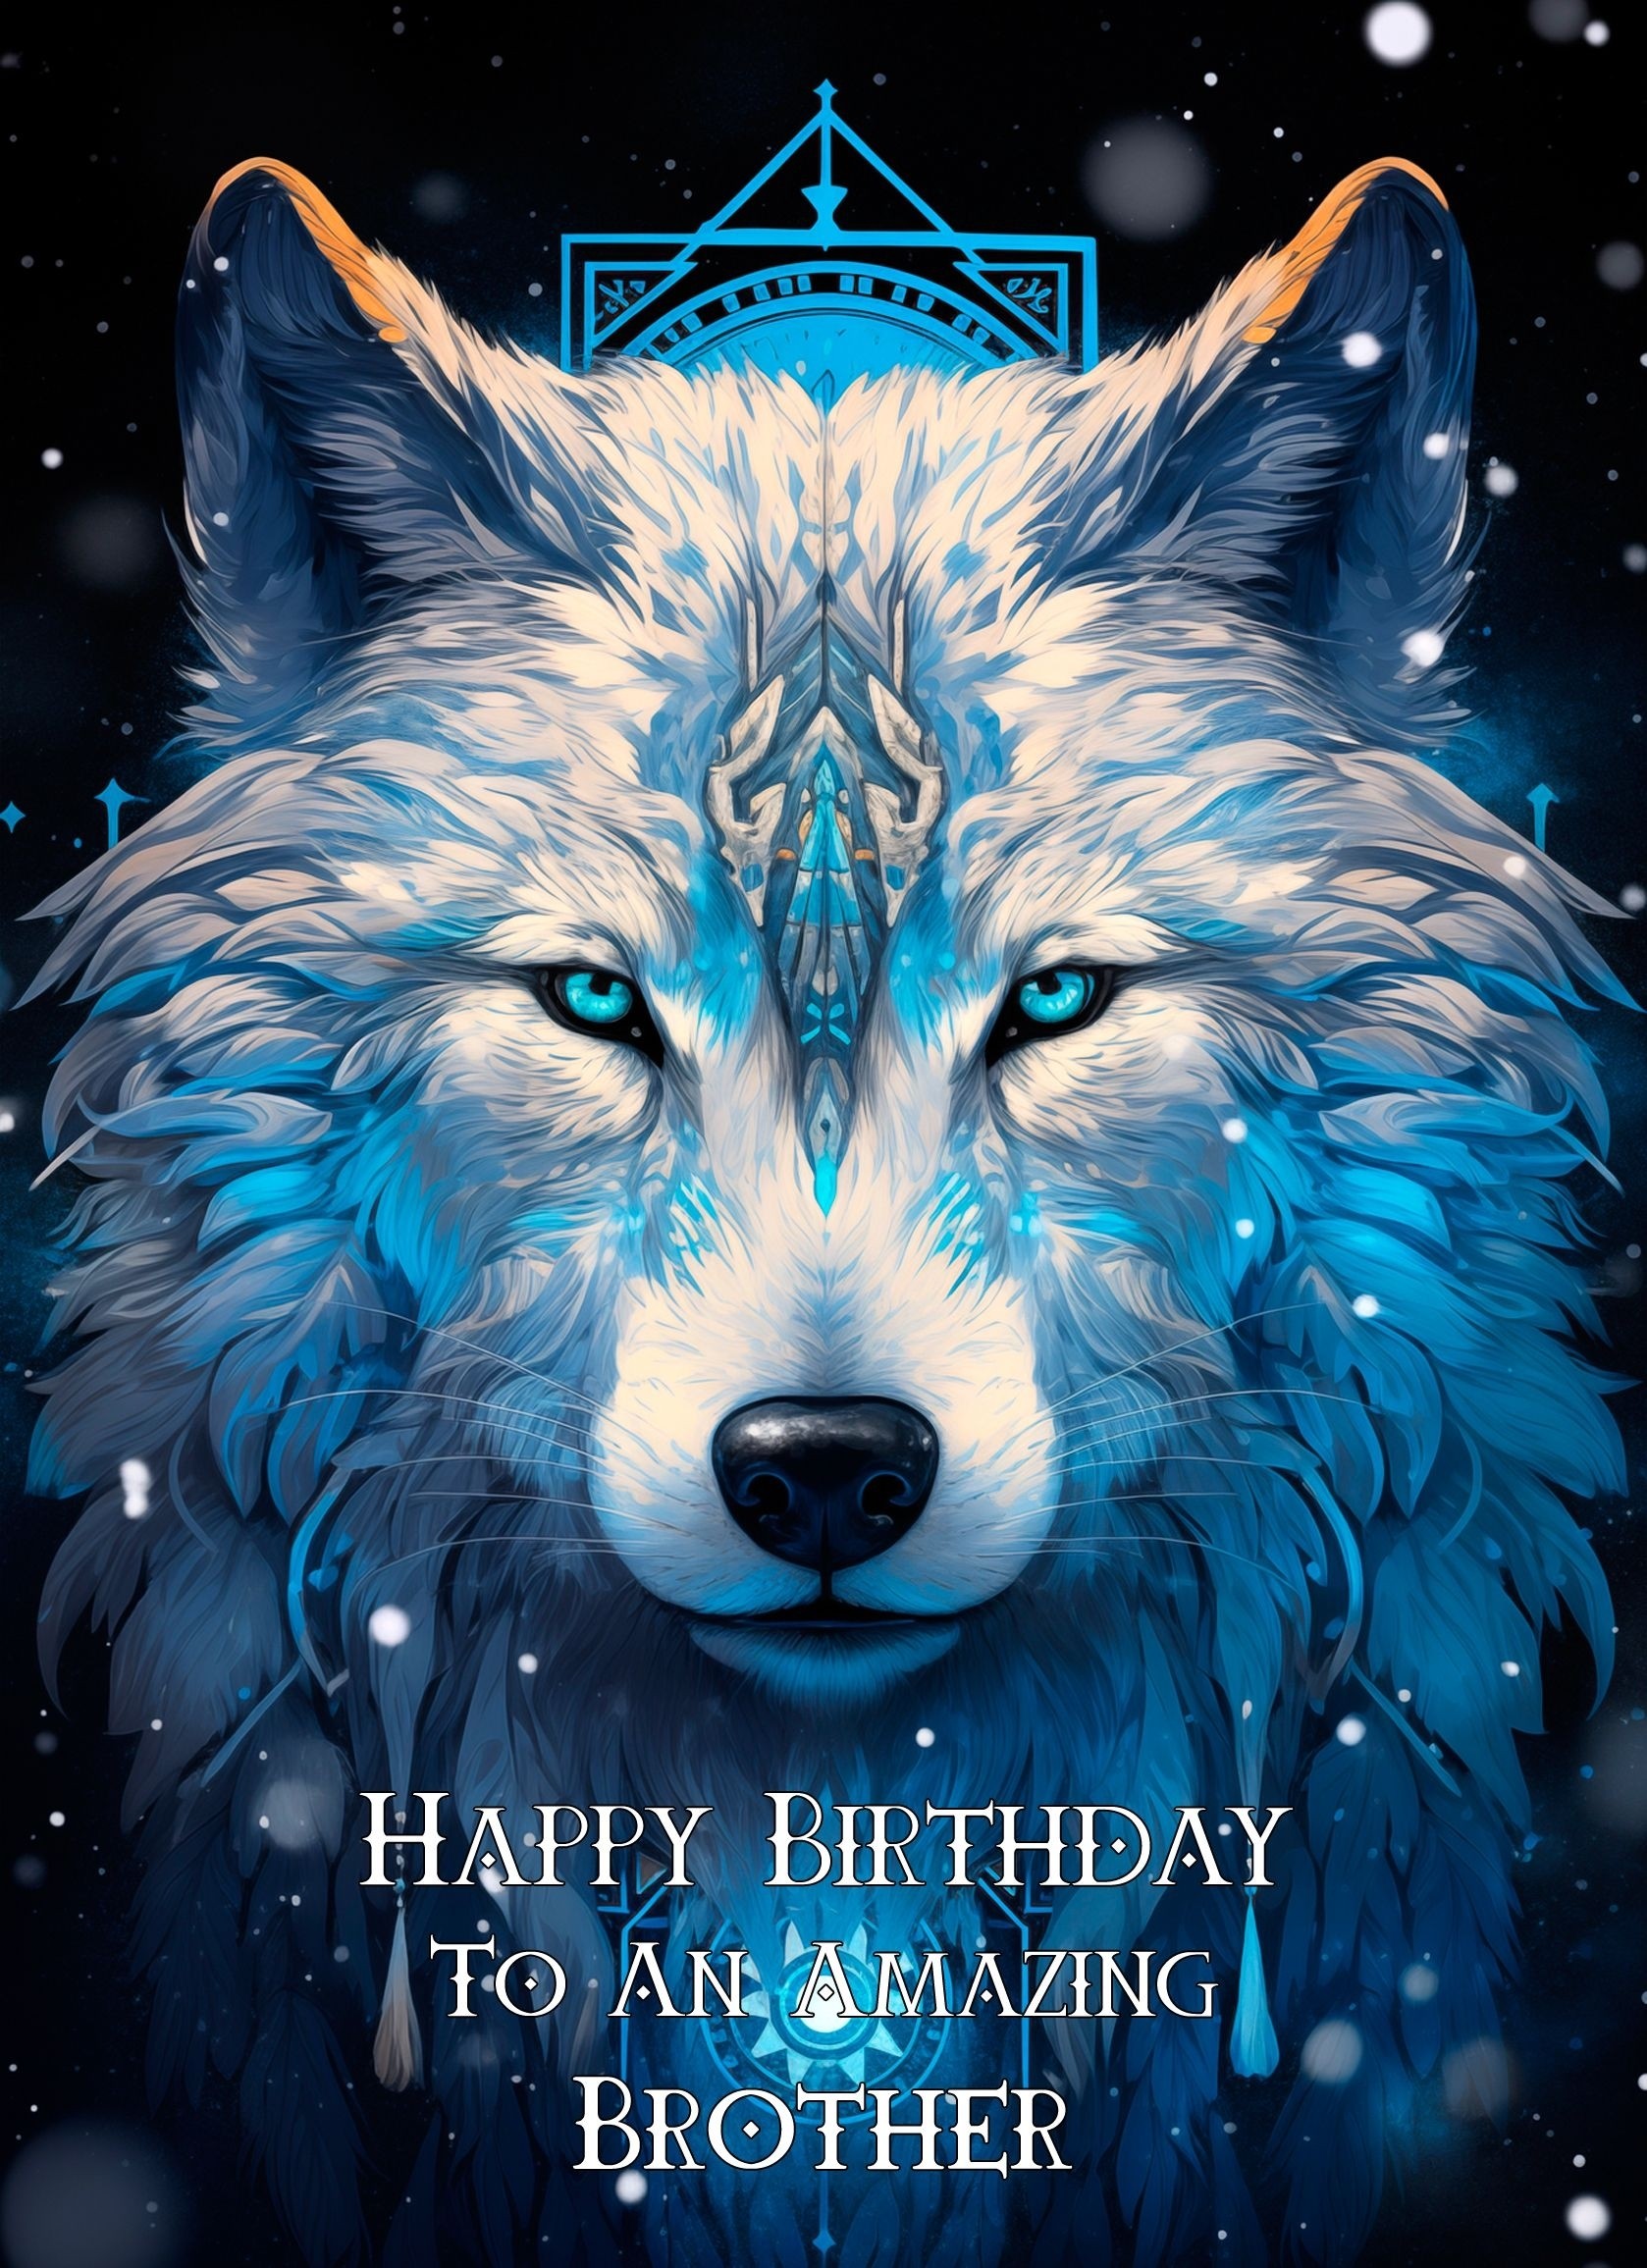 Tribal Wolf Art Birthday Card For Brother (Design 2)